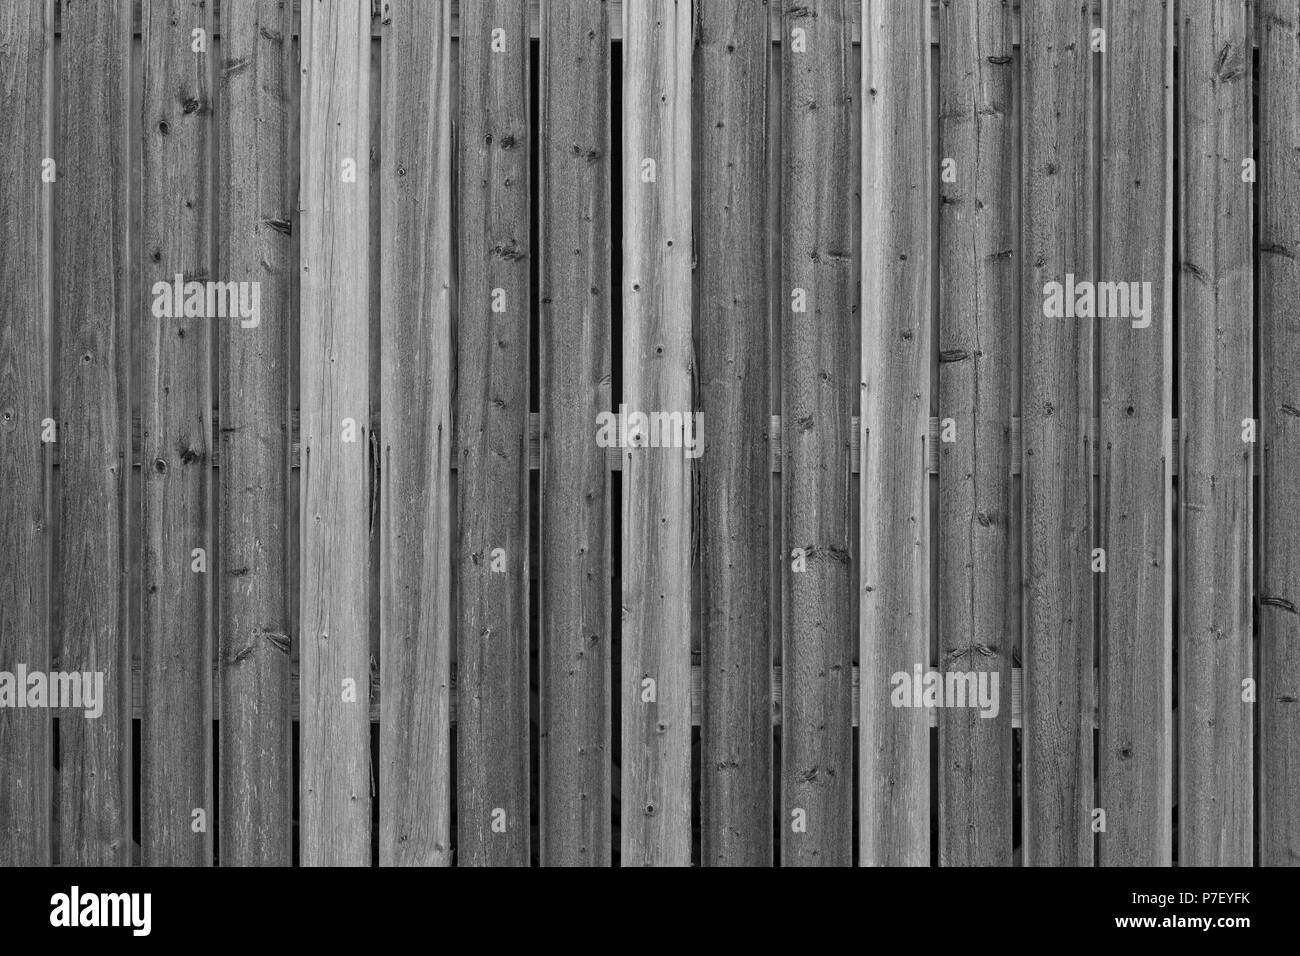 Full frame background of an unpainted wood board wall in black and white Stock Photo